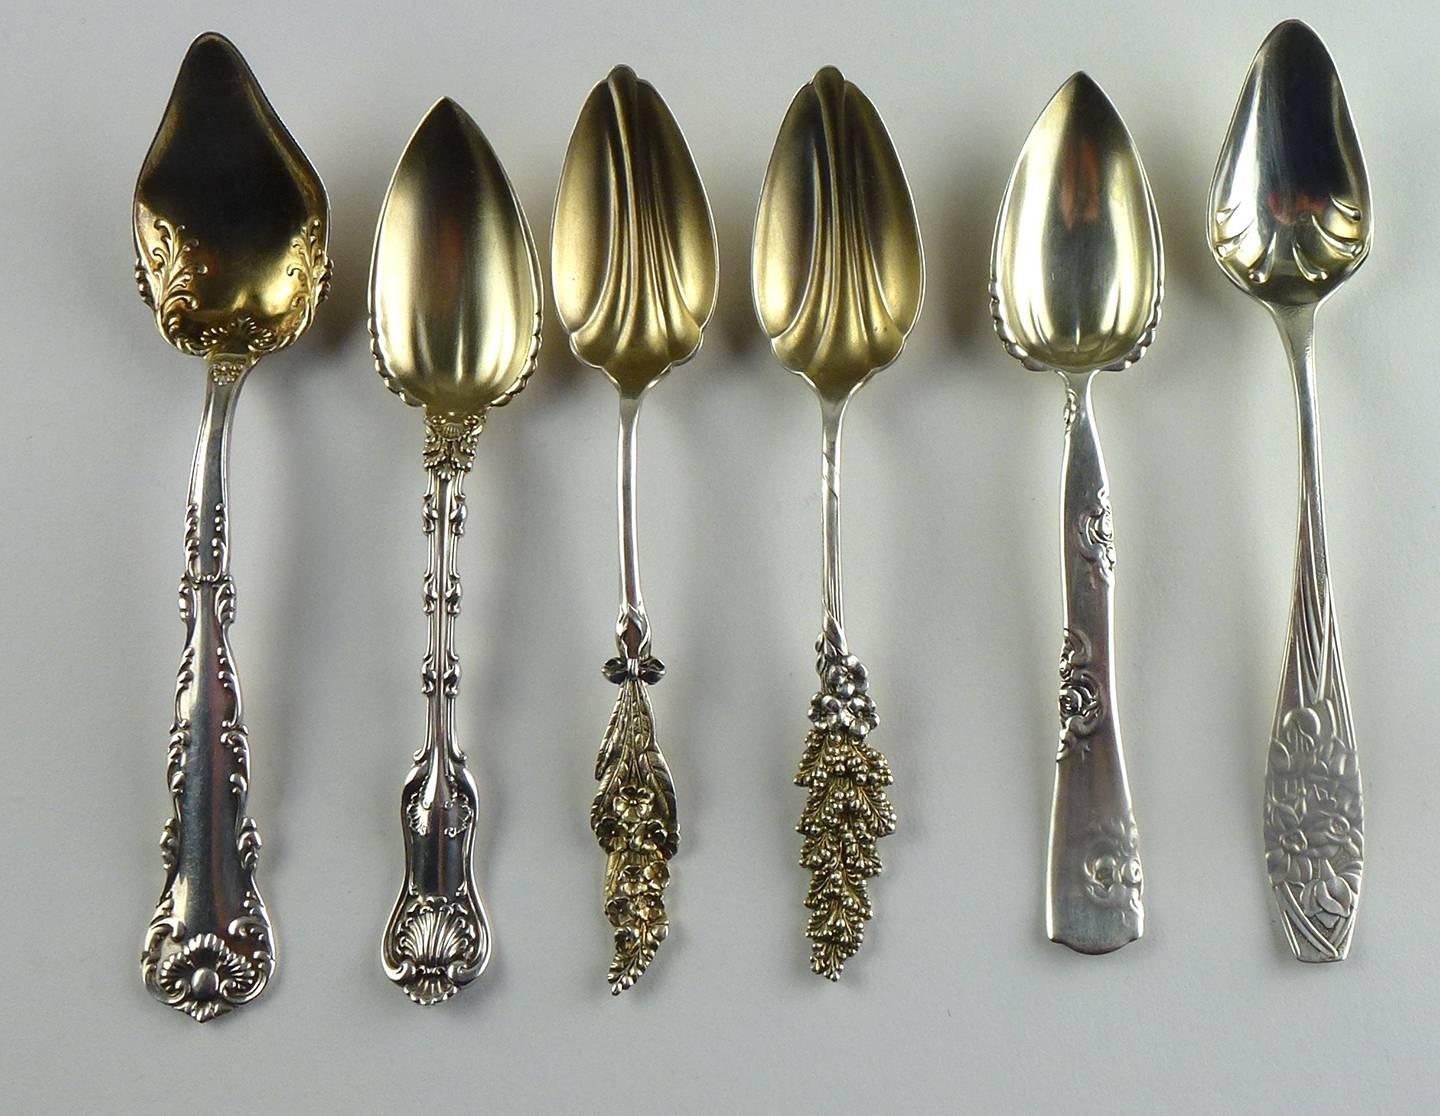 Harlequin set of six sterling and sterling with gold-wash grapefruit spoons, each with a different handle design, including Japanesque iris floral; Imperial Queen and Louis XV by Whiting. 

Put together as a set by a creative tablescaper, this